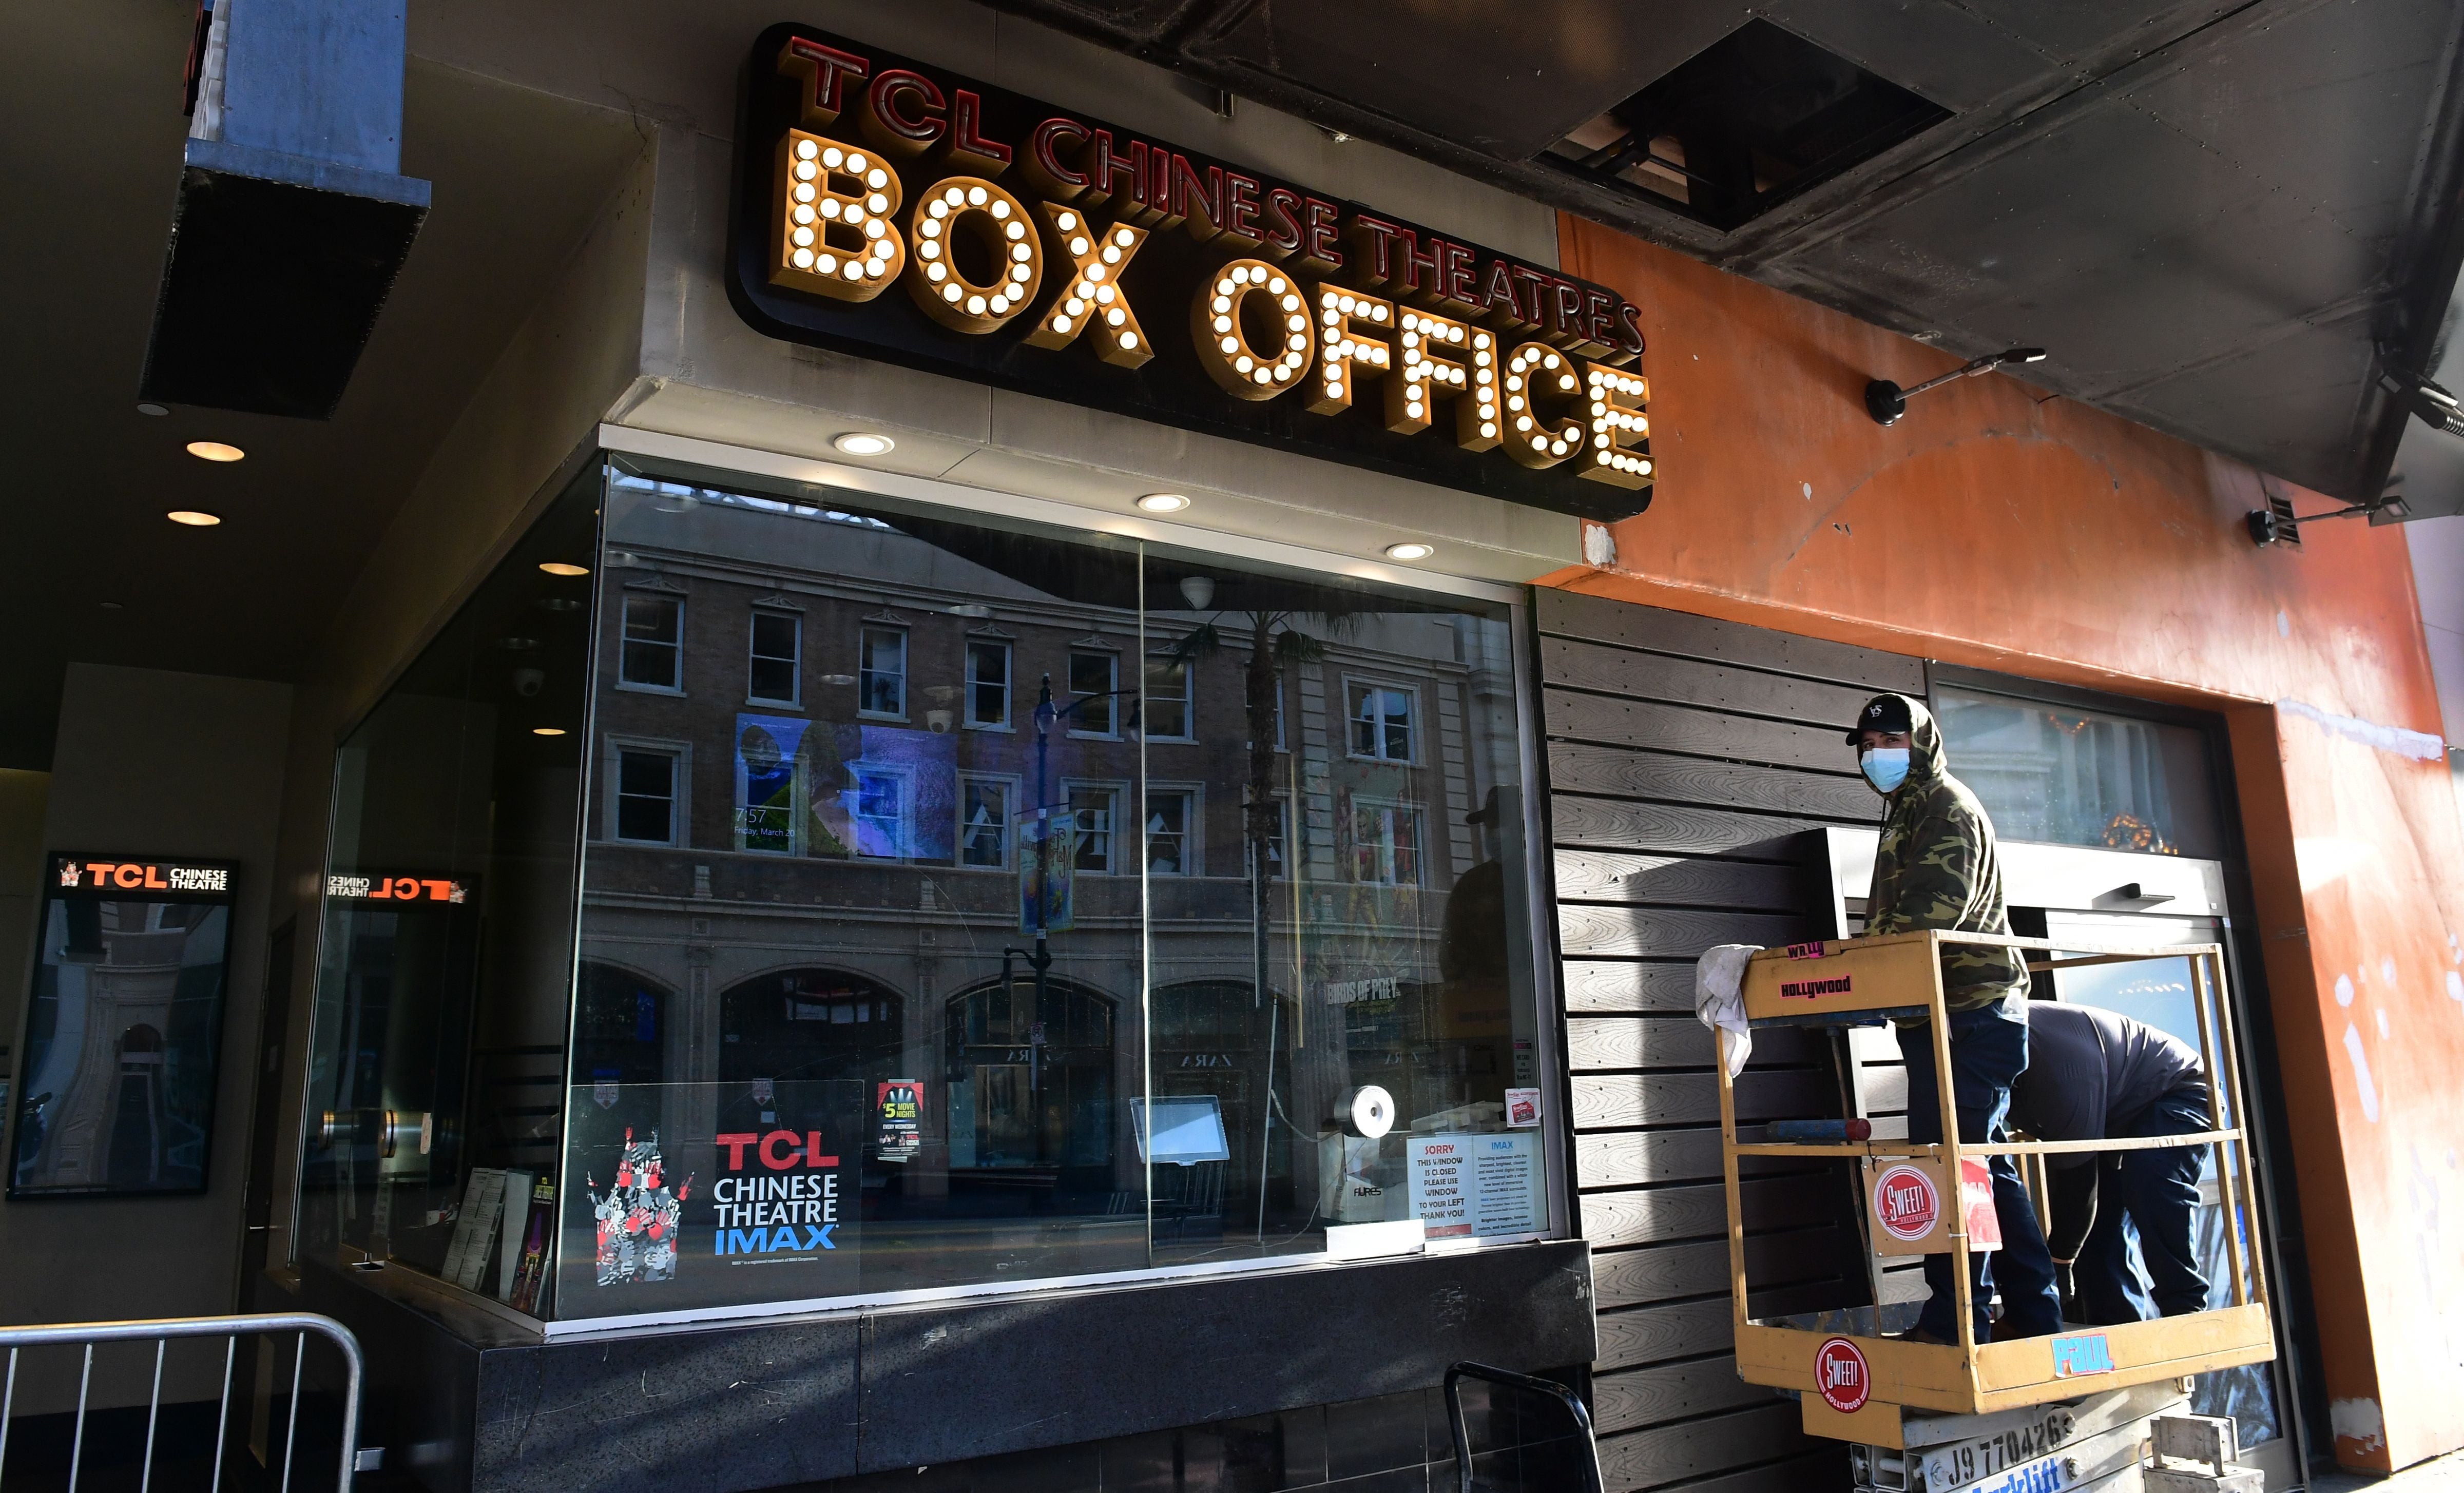 File image: TCL Chinese Theater box office on March 20, 2020 in Los Angeles, California a day after Los Angeles County announced a near-lockdown